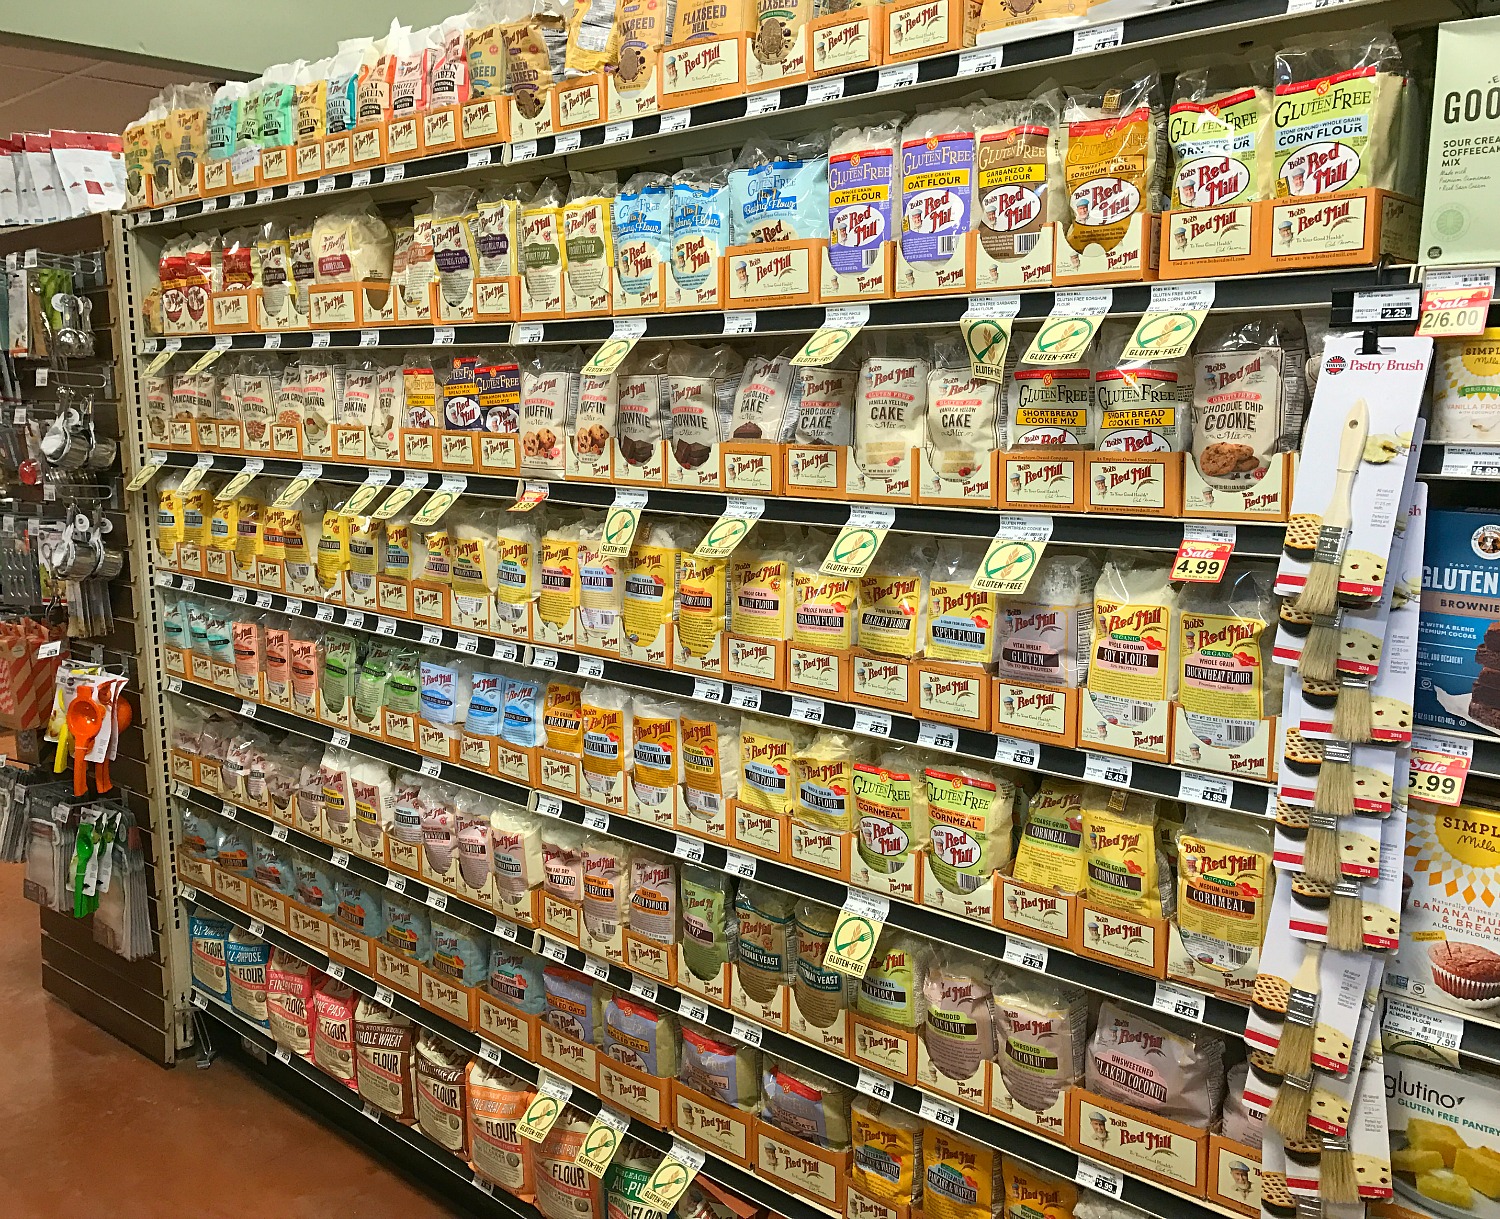 Looking for natural and organic food at affordable prices? Then check out Lucky's Market in Plantation, it's every foodie's dream!